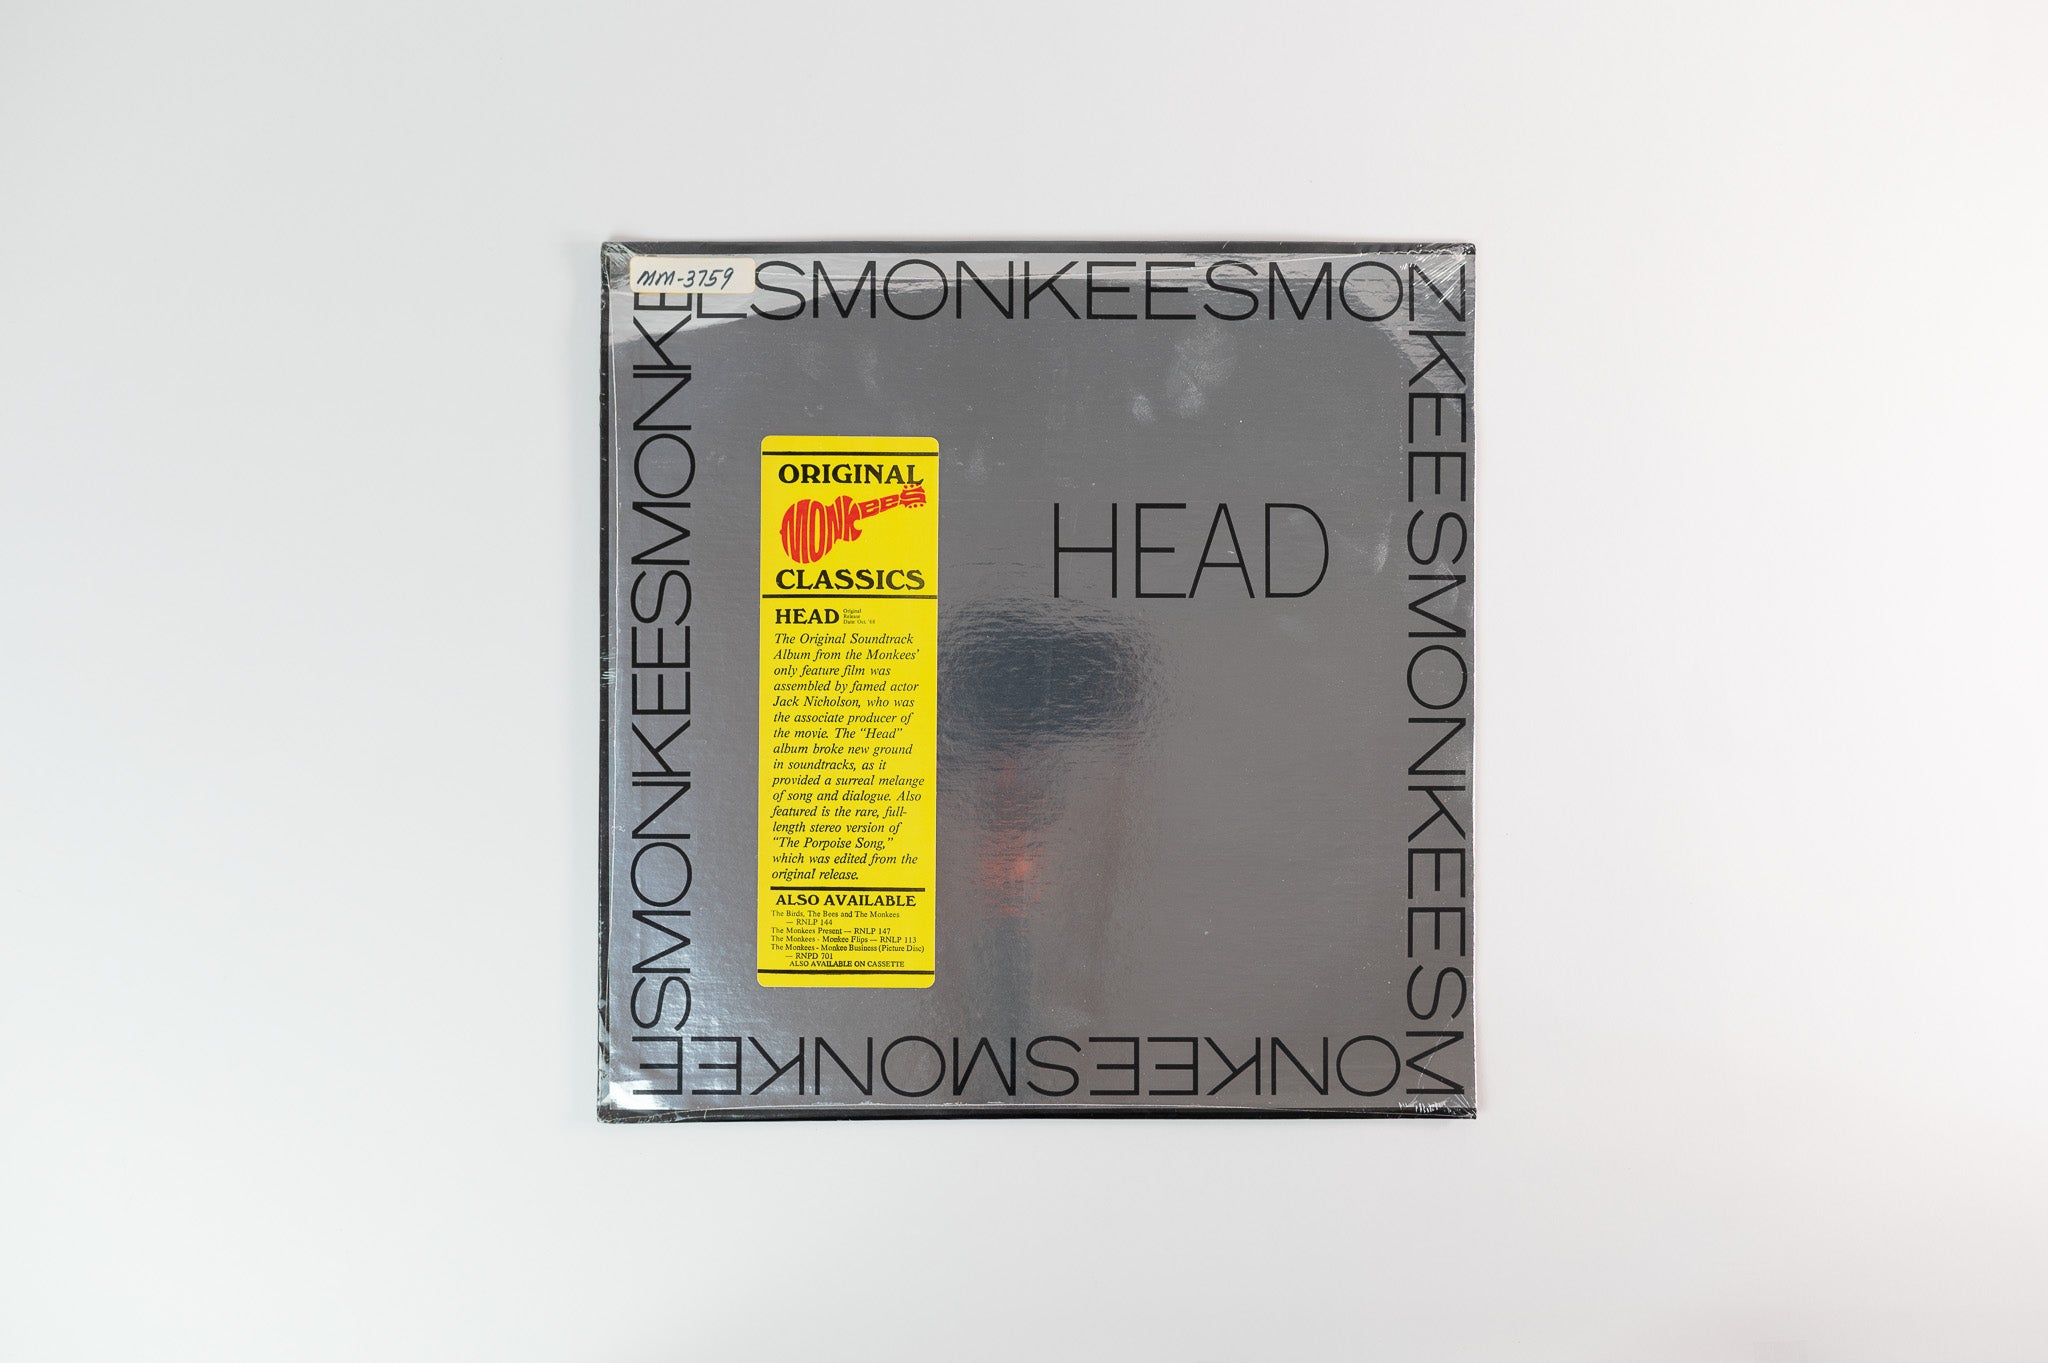 The Monkees - Head on Rhino - 1985 Reissue Sealed